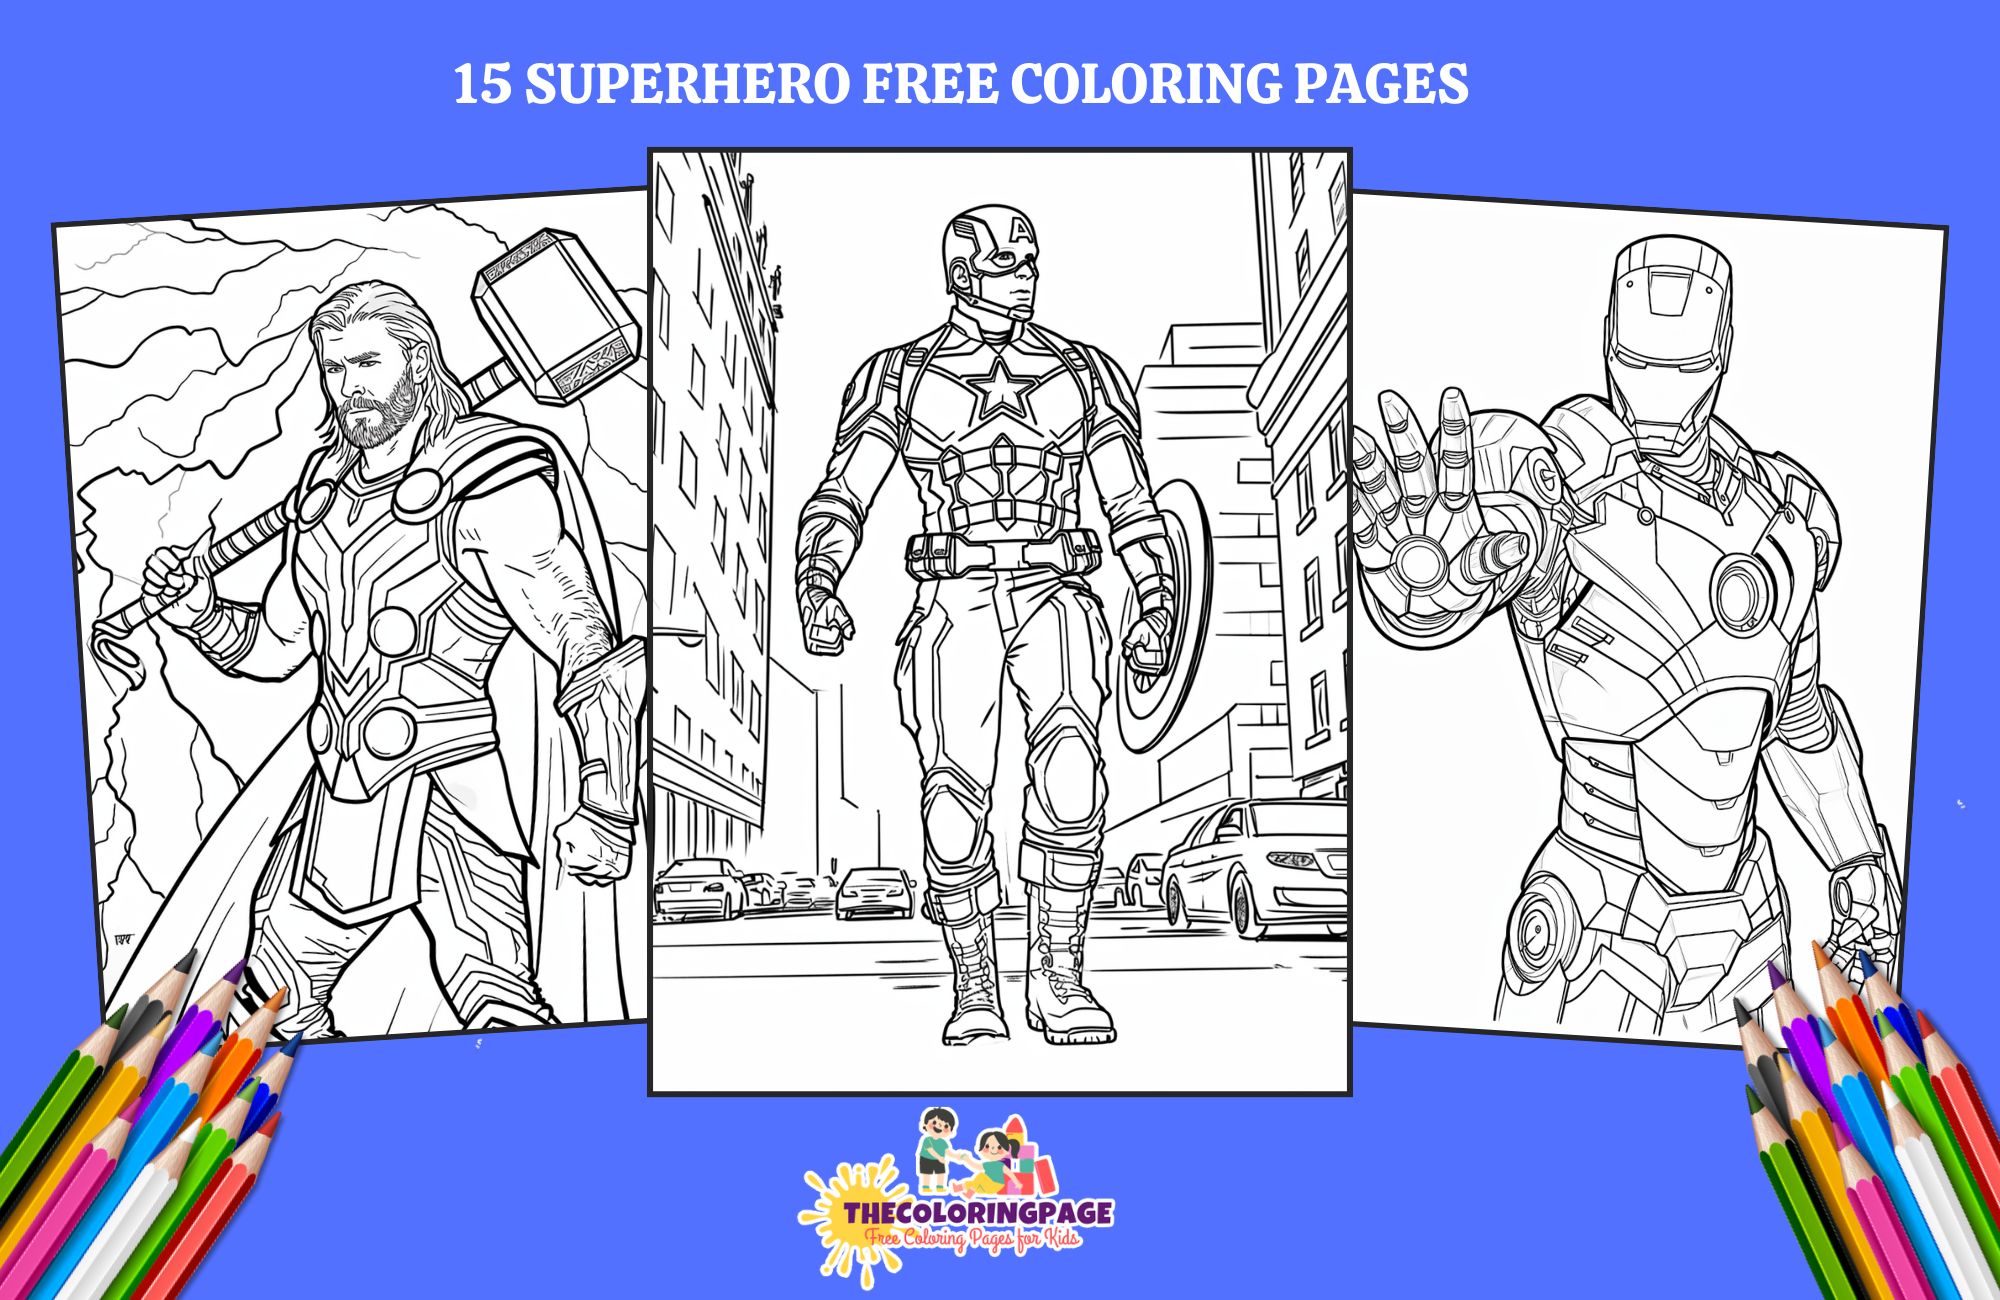 15 free superhero coloring pages to inspire your child's creativity